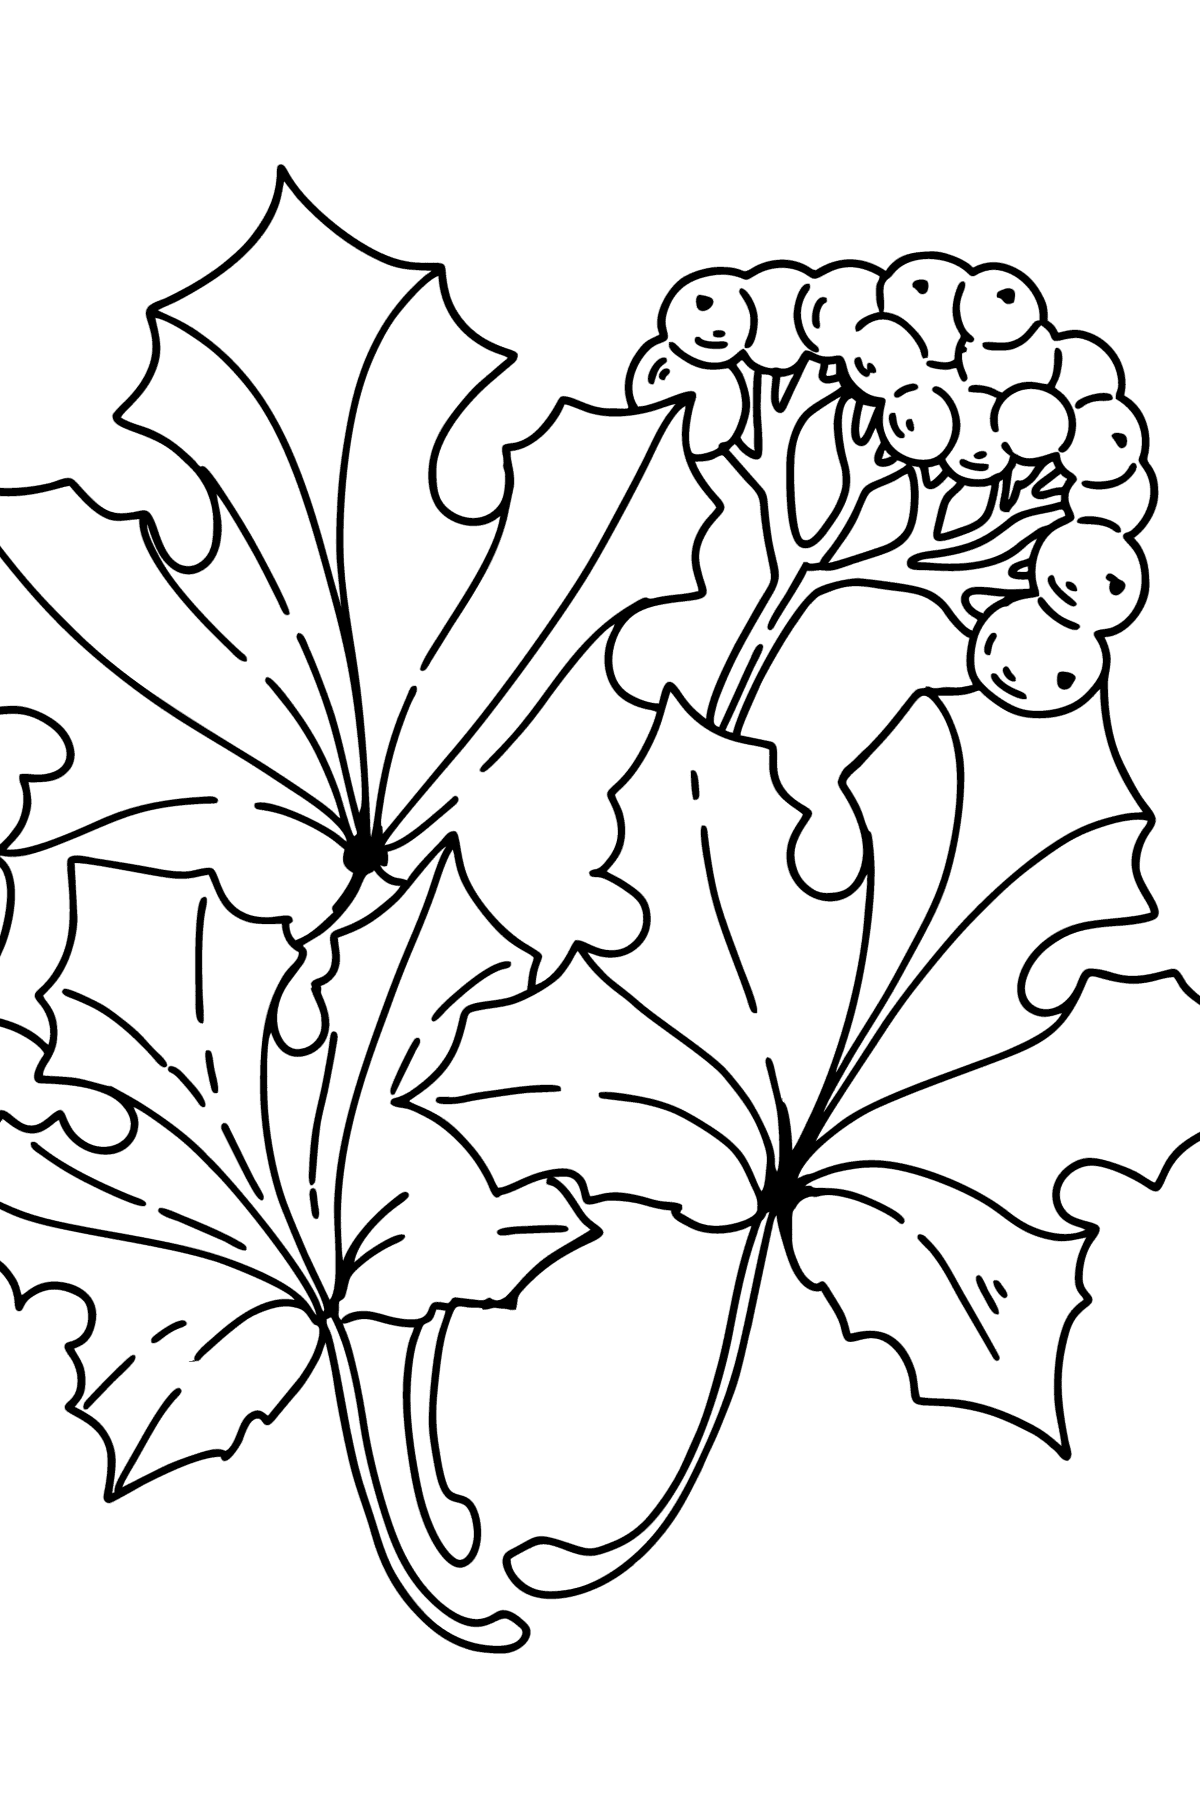 Coloring page - Maple Leaves and Elderberries - Coloring Pages for Kids